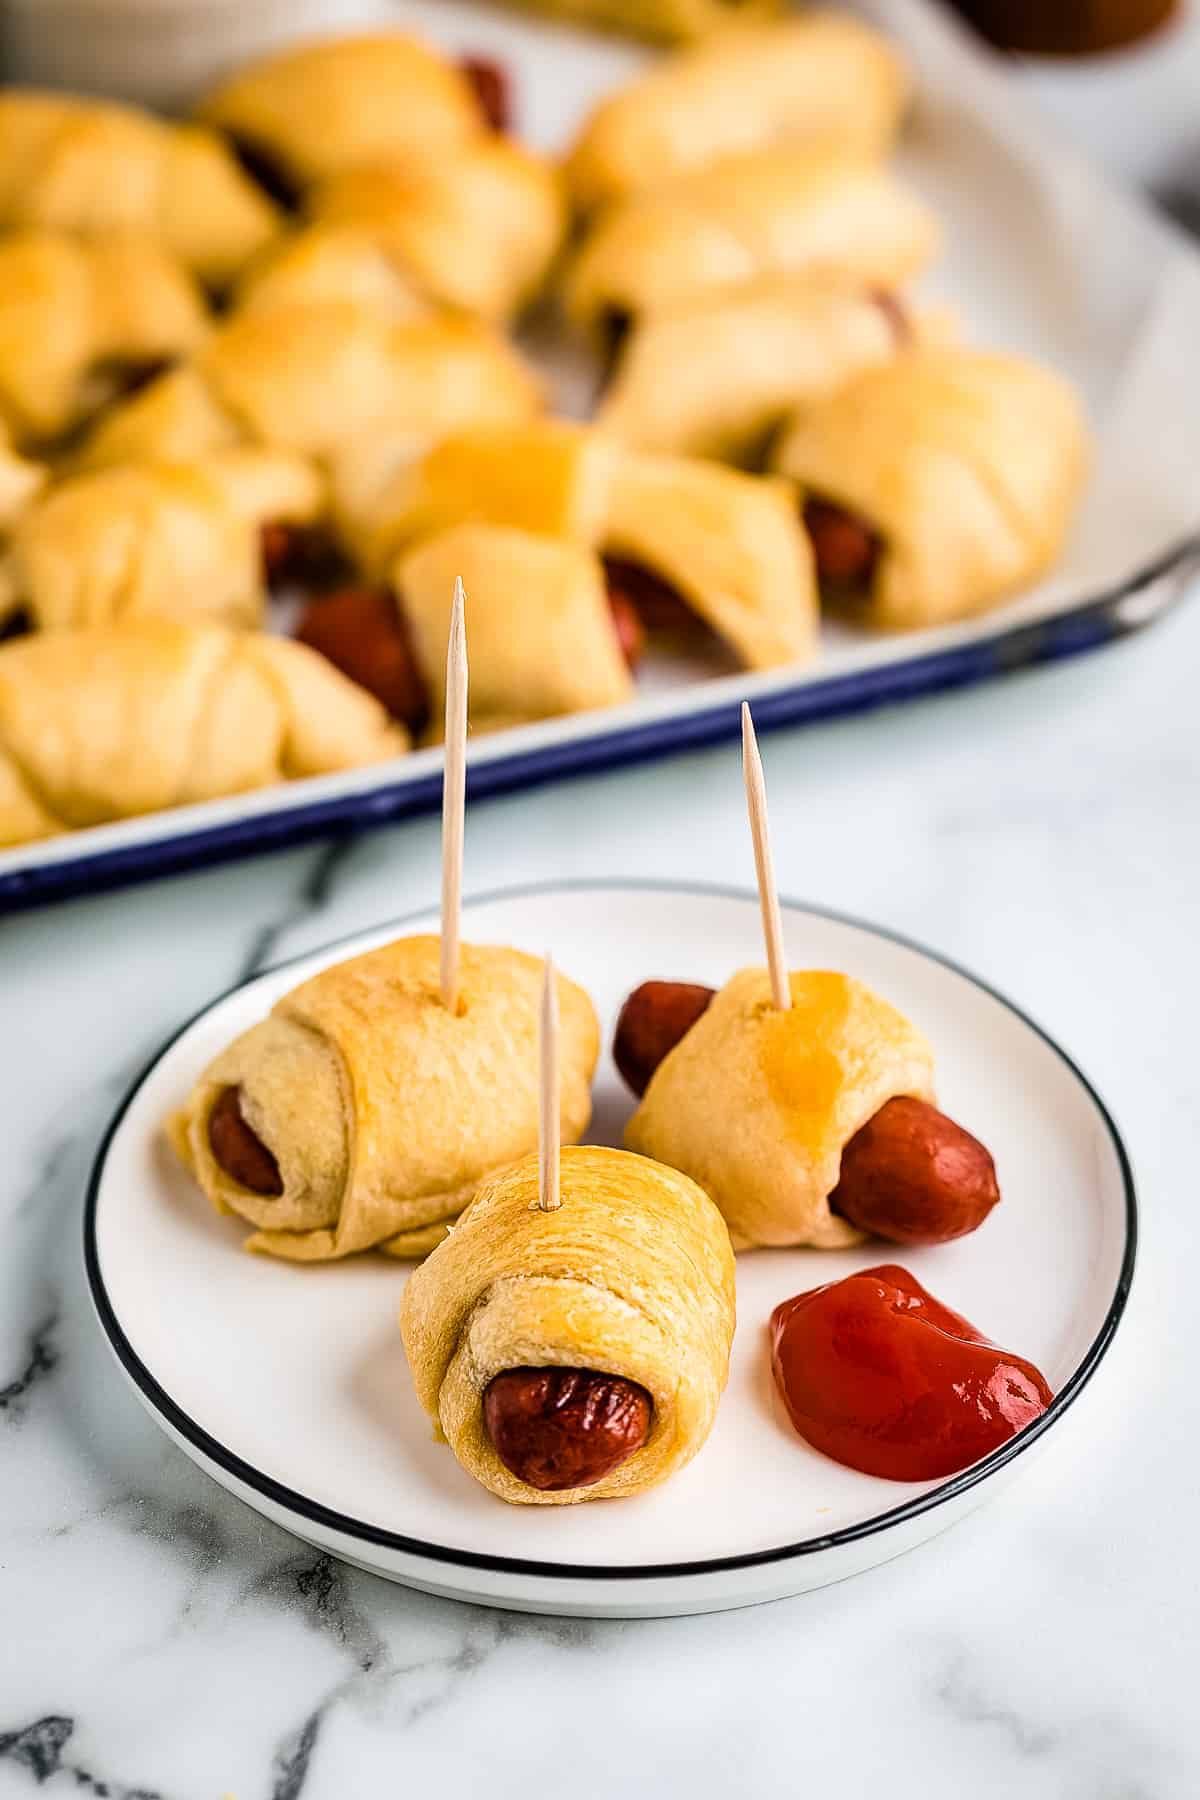 Plate with pigs in a blanket with toothpicks in them and ketchup